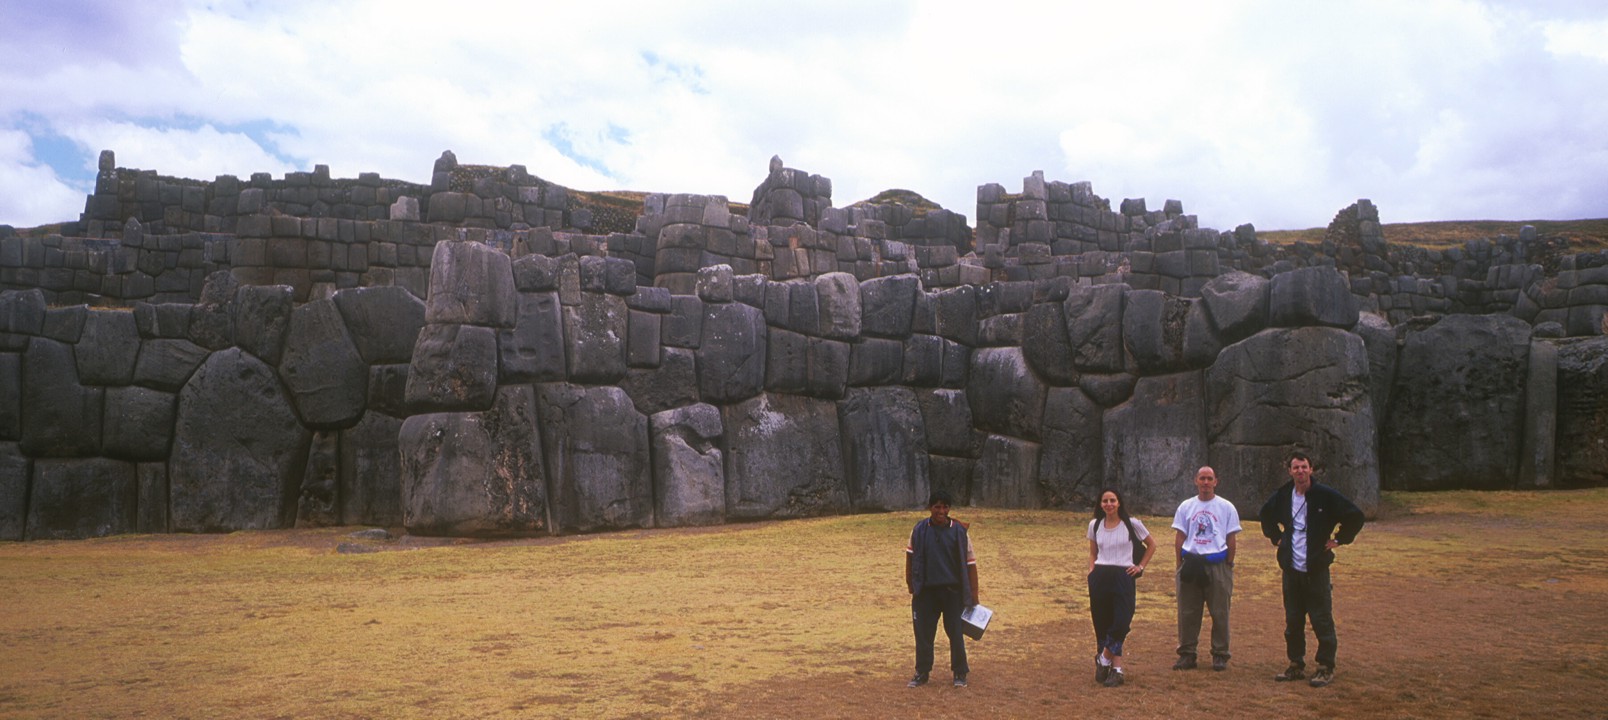 The group poses in front of an Inca wall